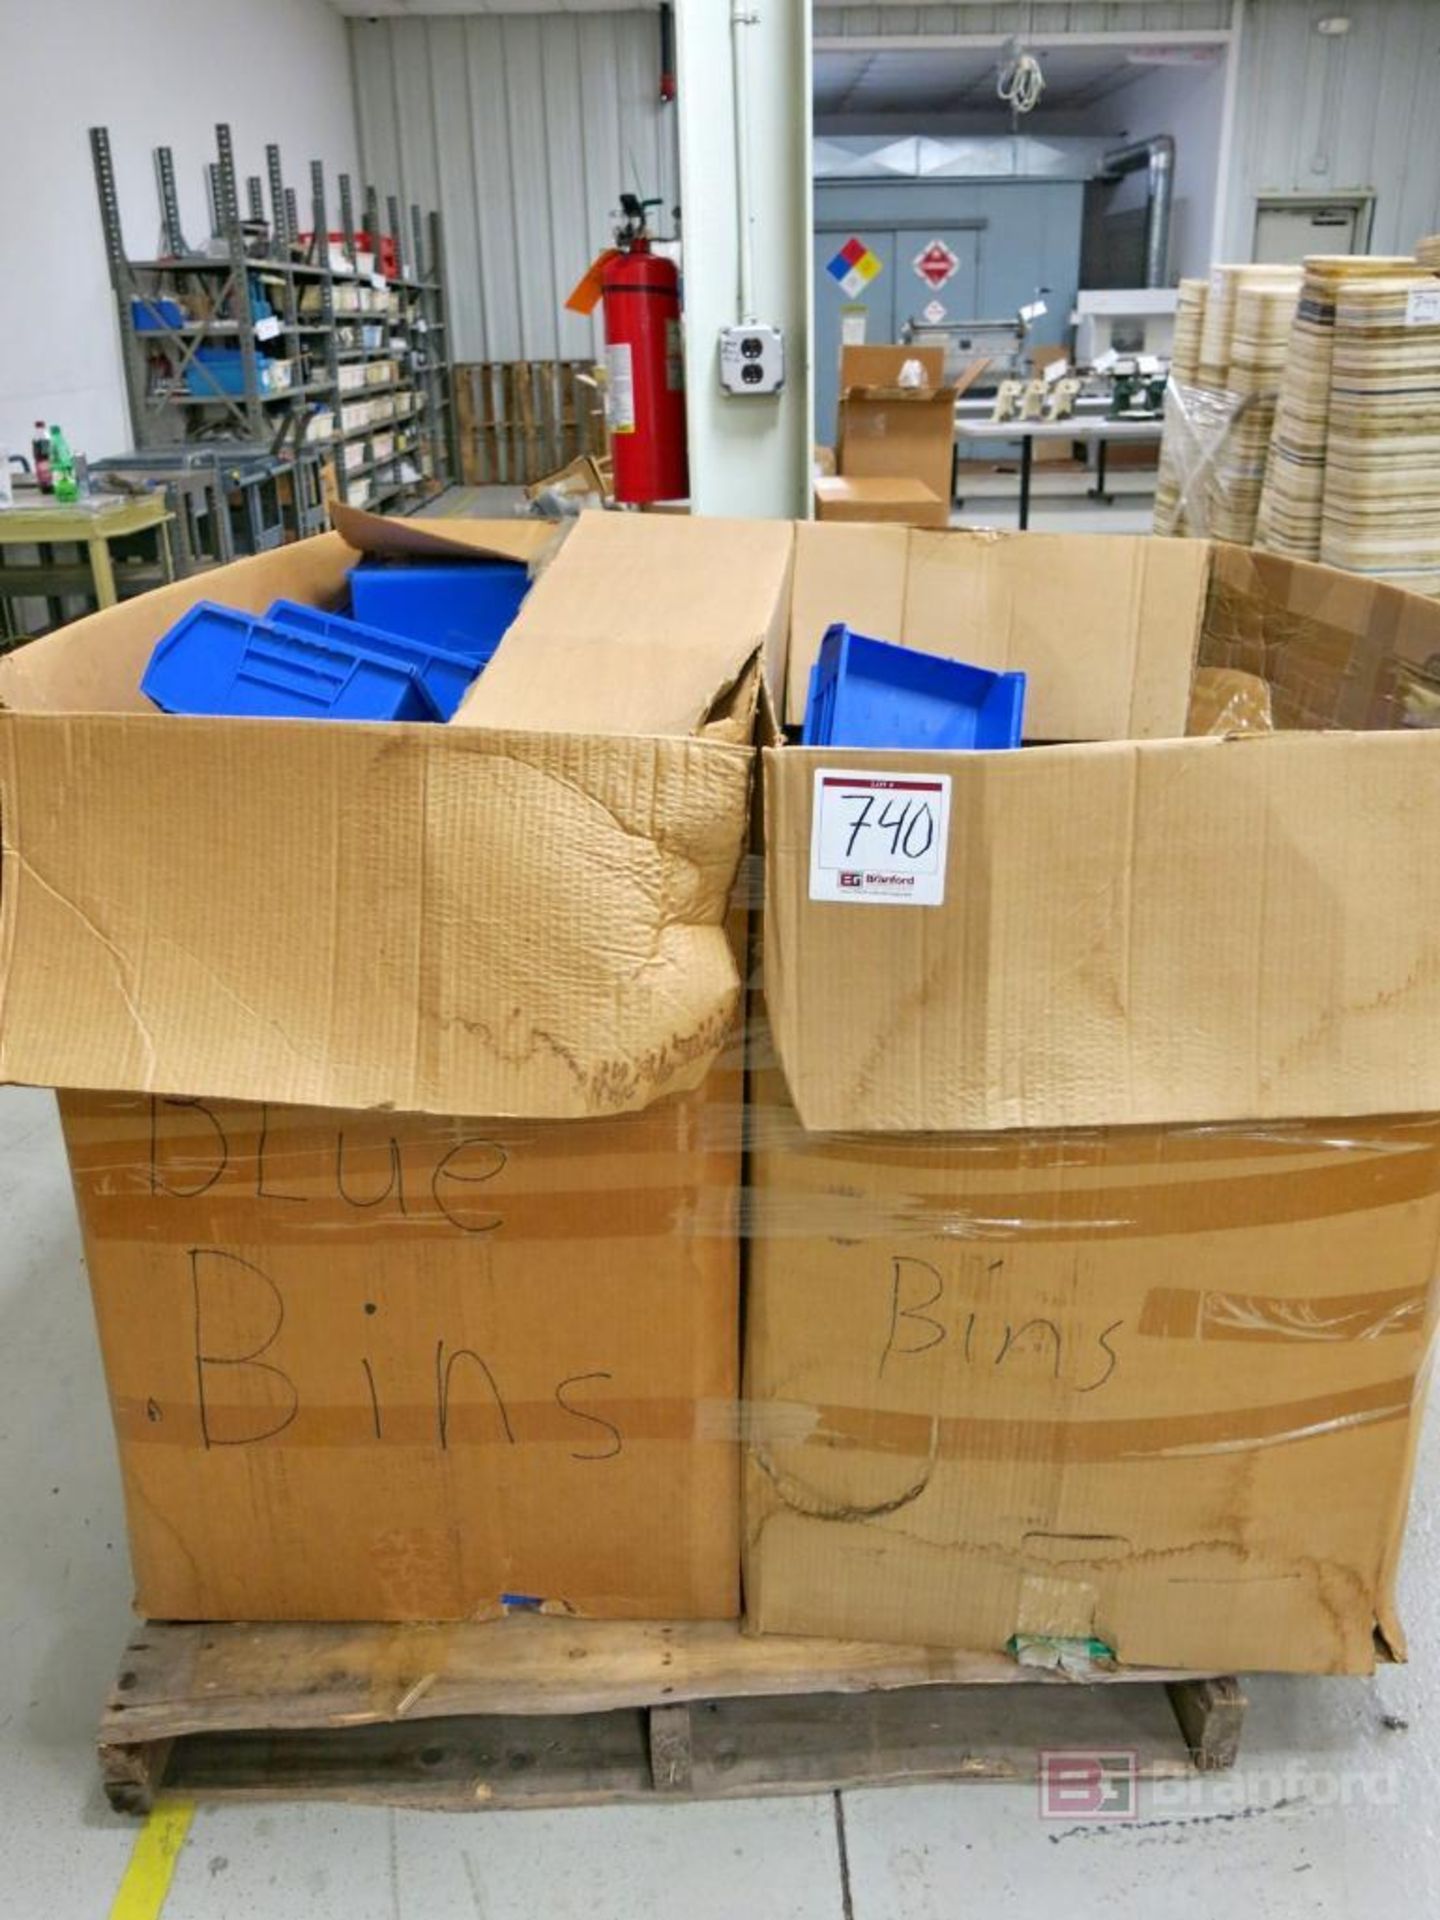 Pallet of Clips, Housing Units